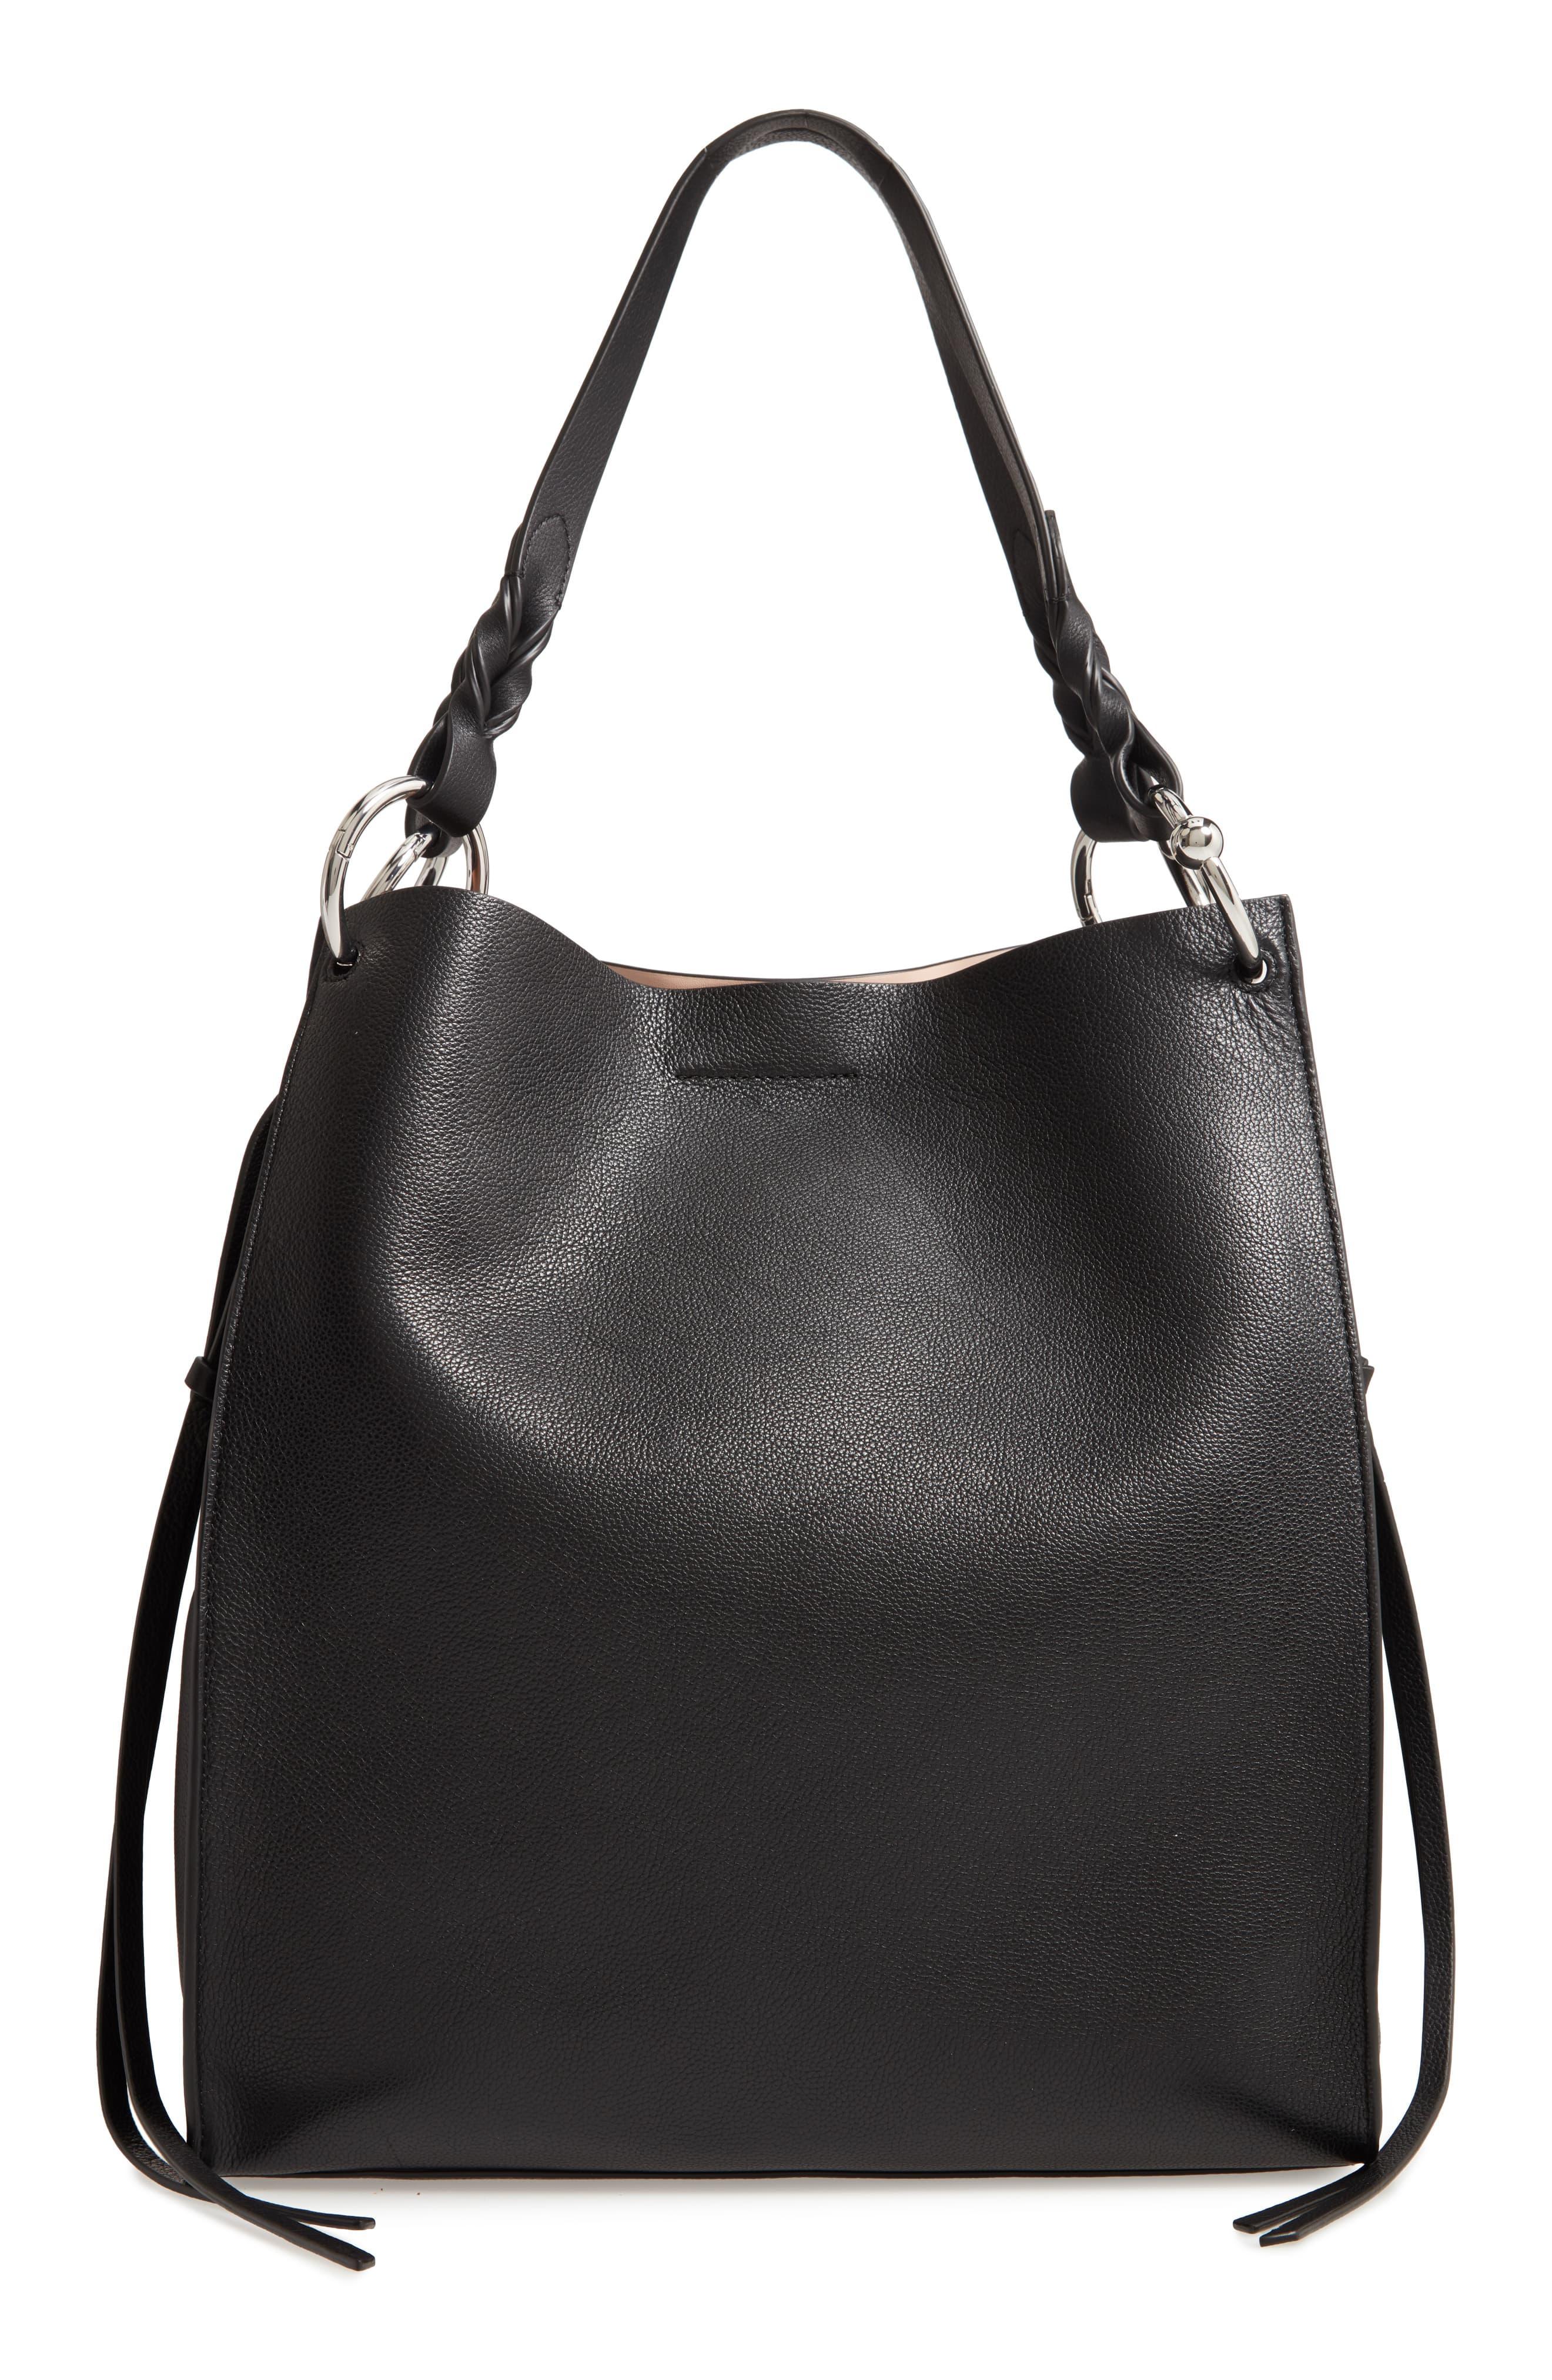 Rebecca Minkoff Kate Soft North/south Leather Tote in Black - Lyst